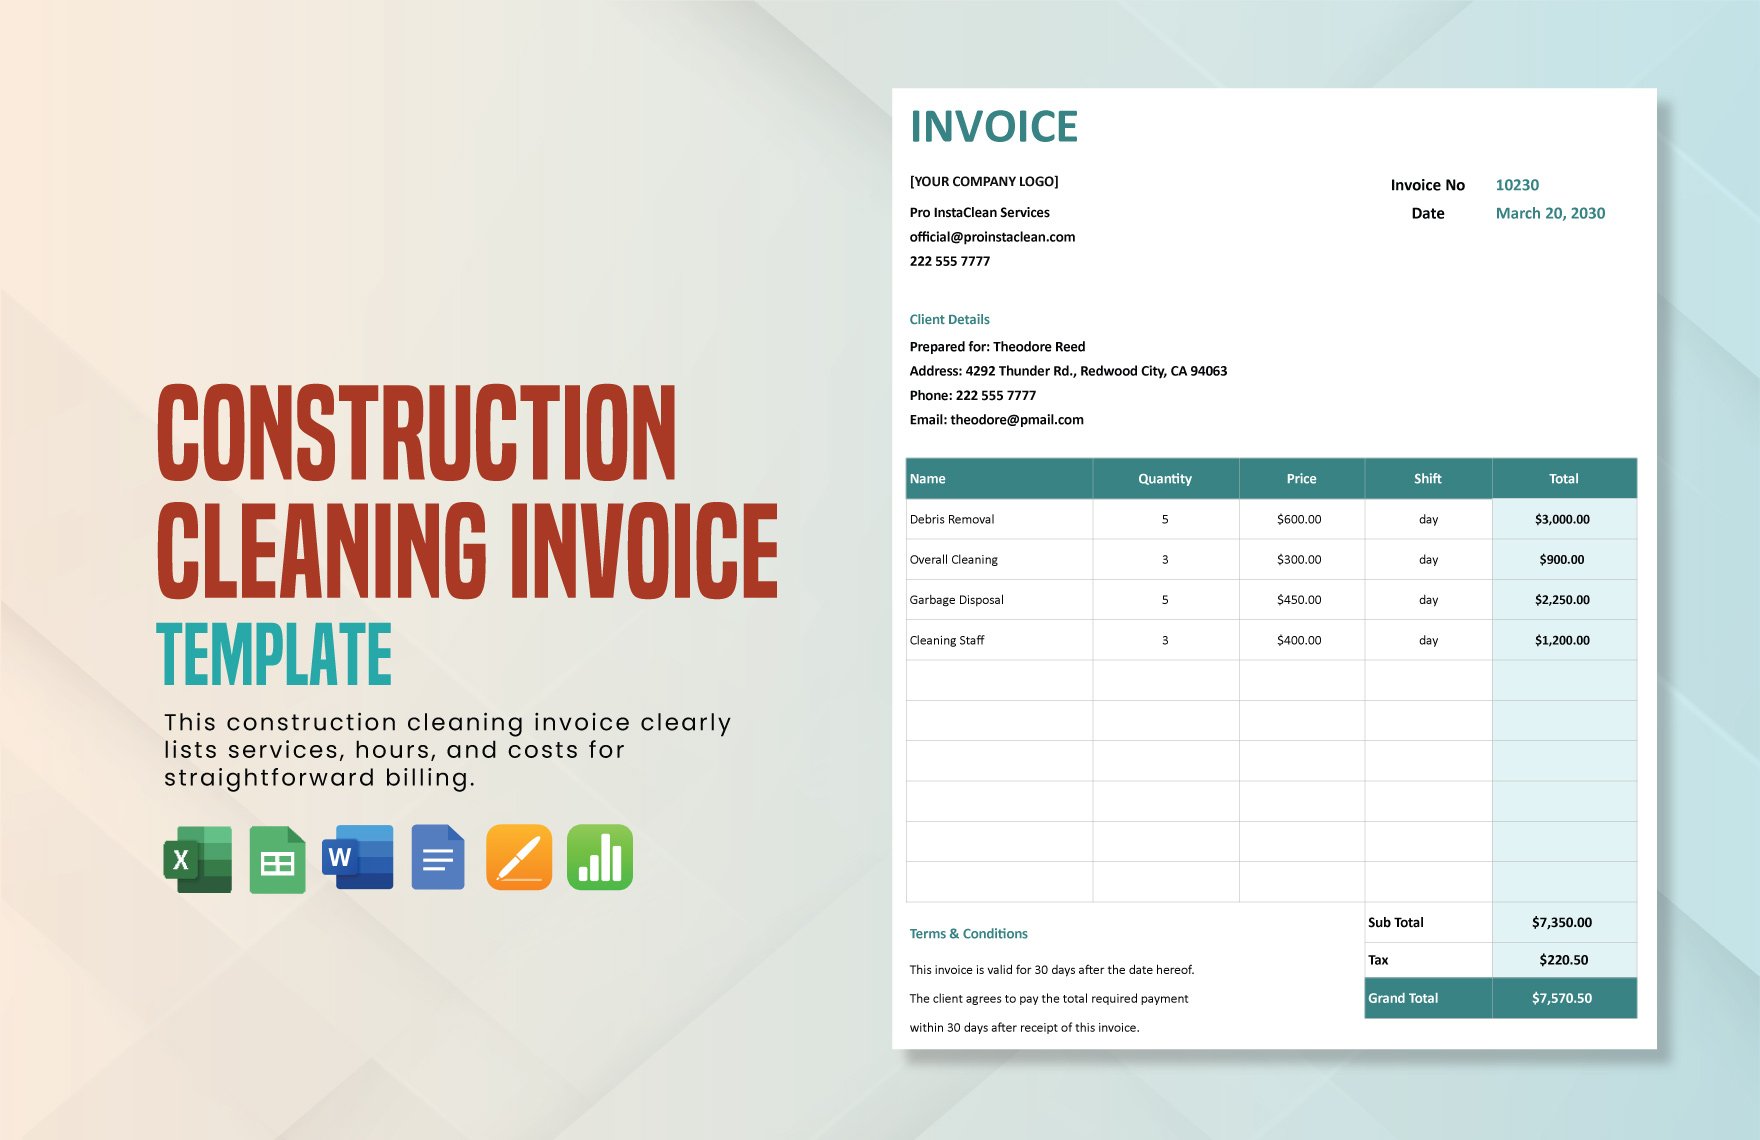 Construction Cleaning Invoice Template in Word, Google Docs, Excel, Google Sheets, Apple Pages, Apple Numbers